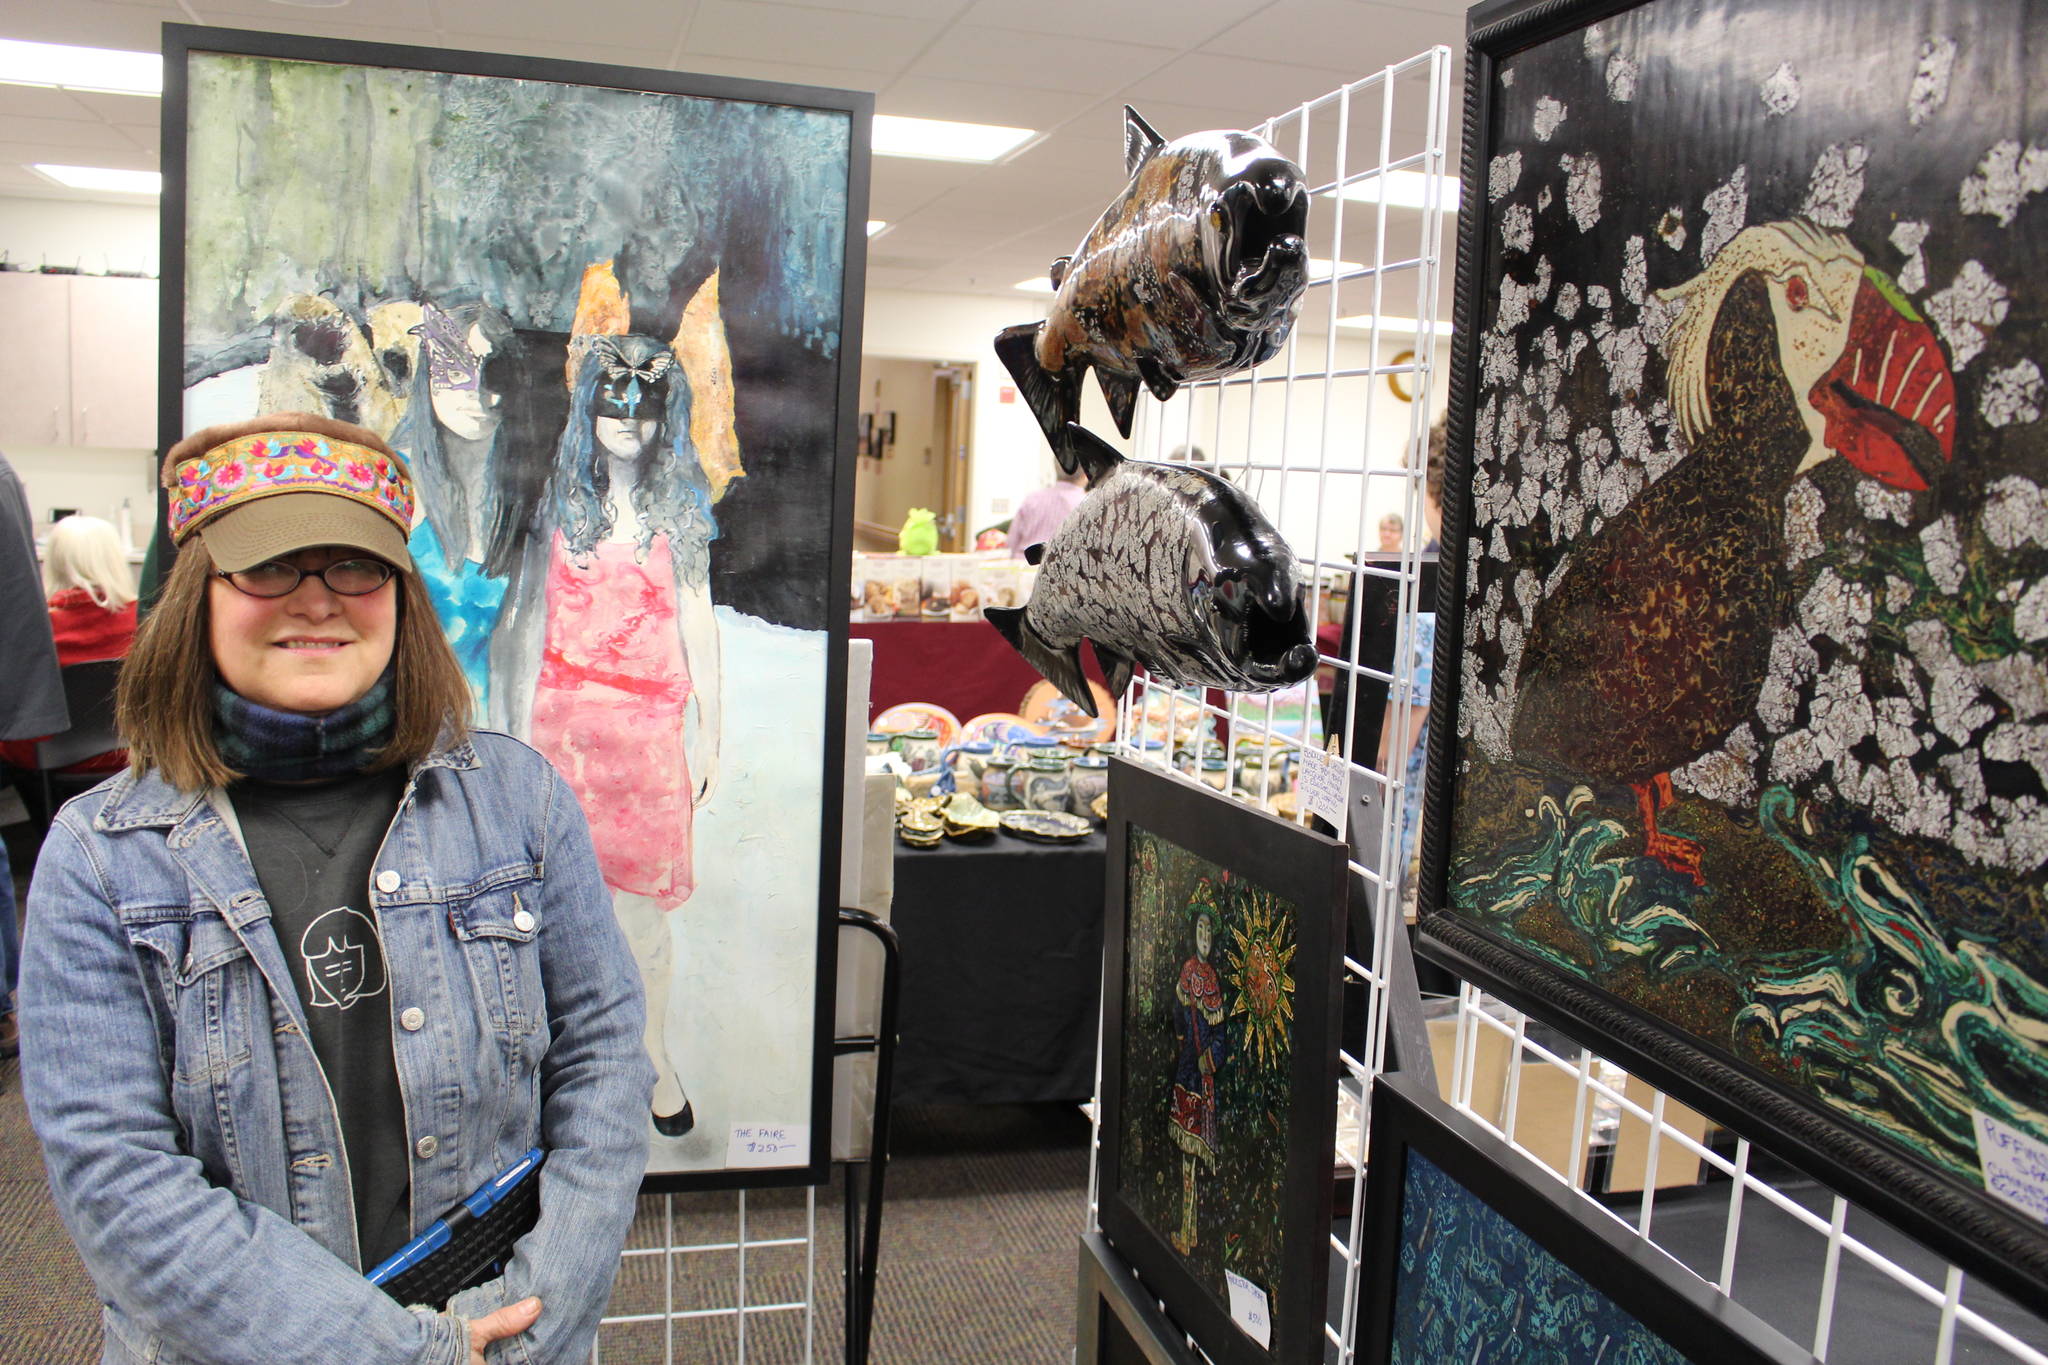 Artist Kathy Matta displays some of her art for sale at the annual Central Peninsula Hospital Auxiliary Holiday Bazaar in Soldotna, Alaska on Dec. 6, 2019. (Photo by Brian Mazurek/Peninsula Clarion)